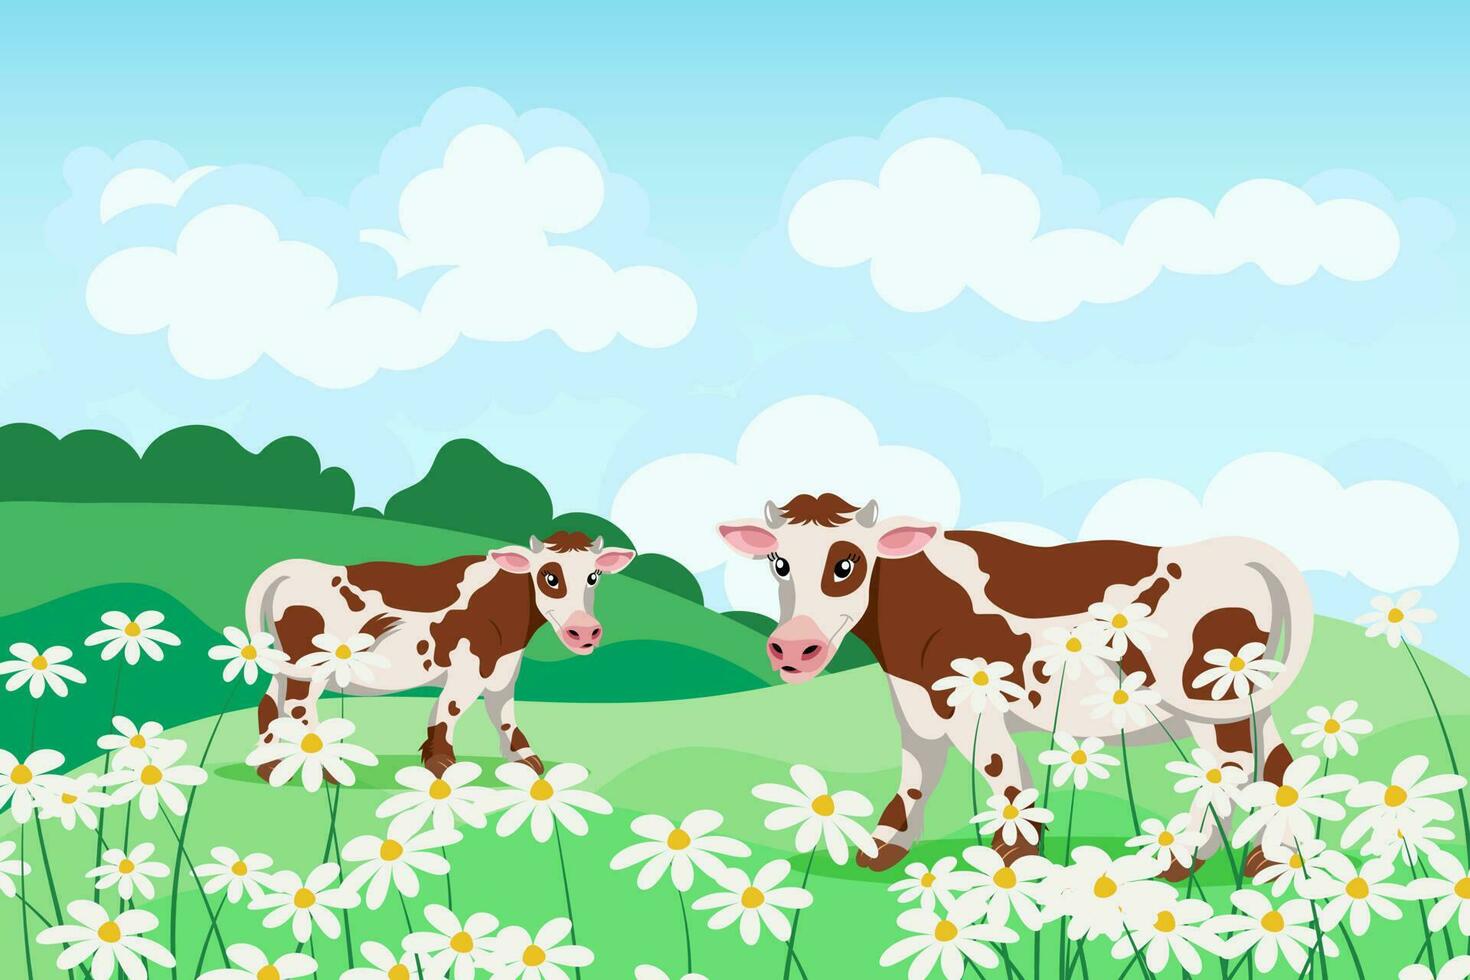 Cute spotted cows in a field of daisies, summer landscape. Poster, banner, illustration, vector